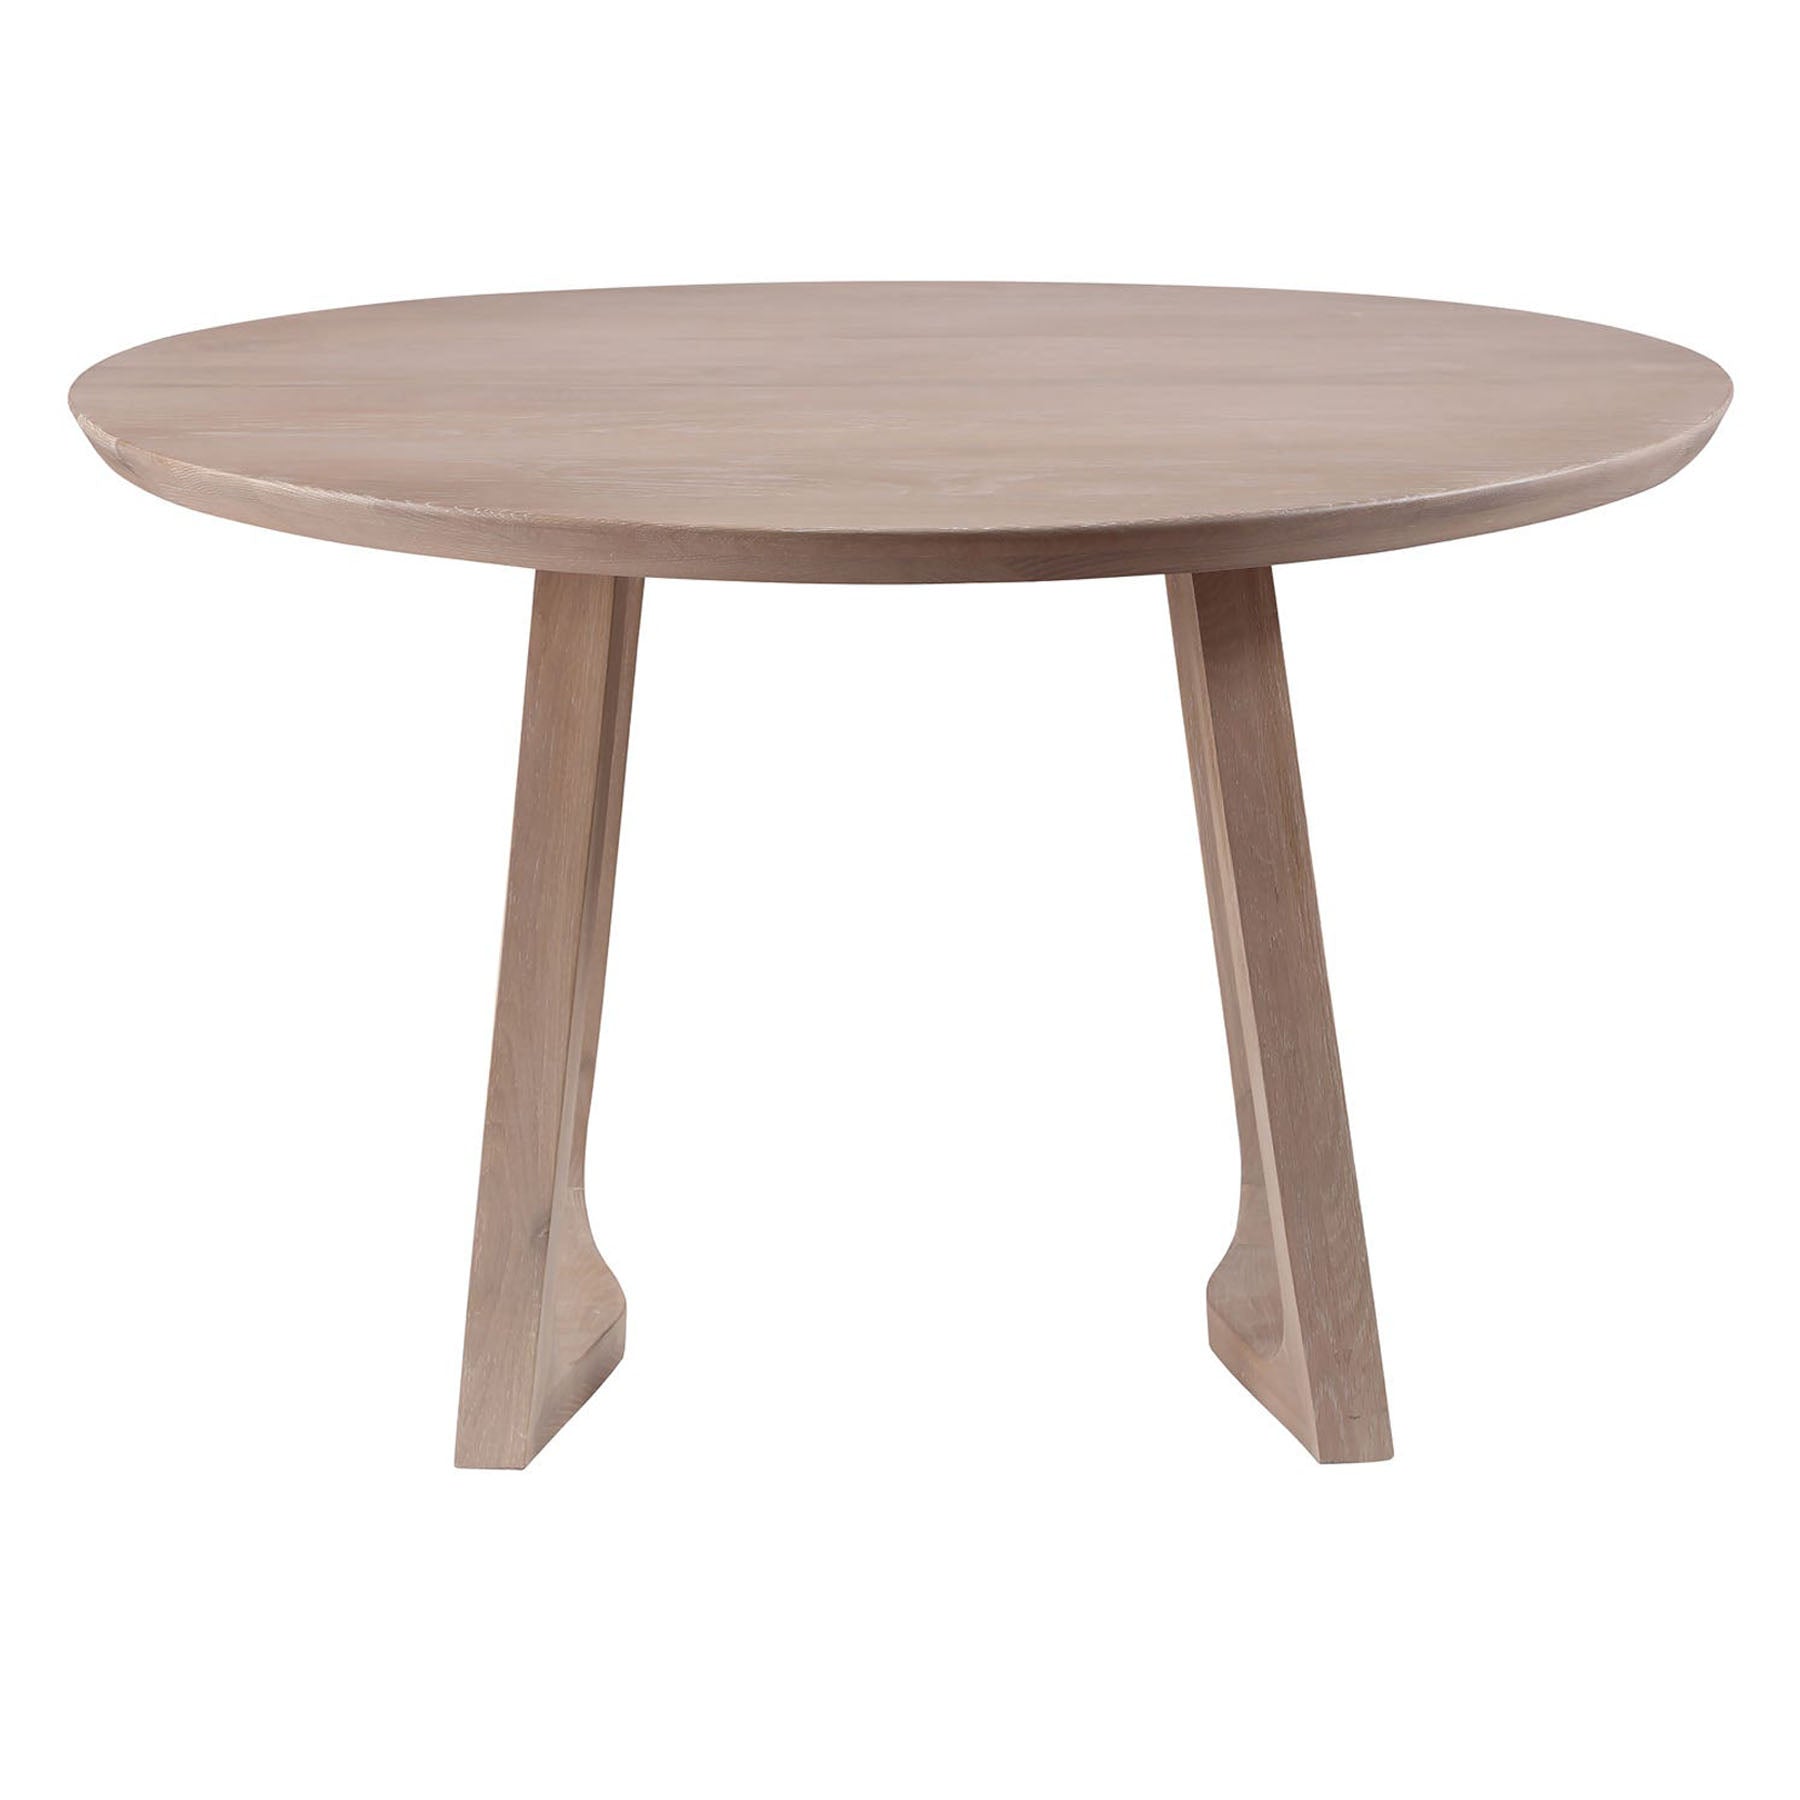 Sold white oak round dining table with seating for up to eight